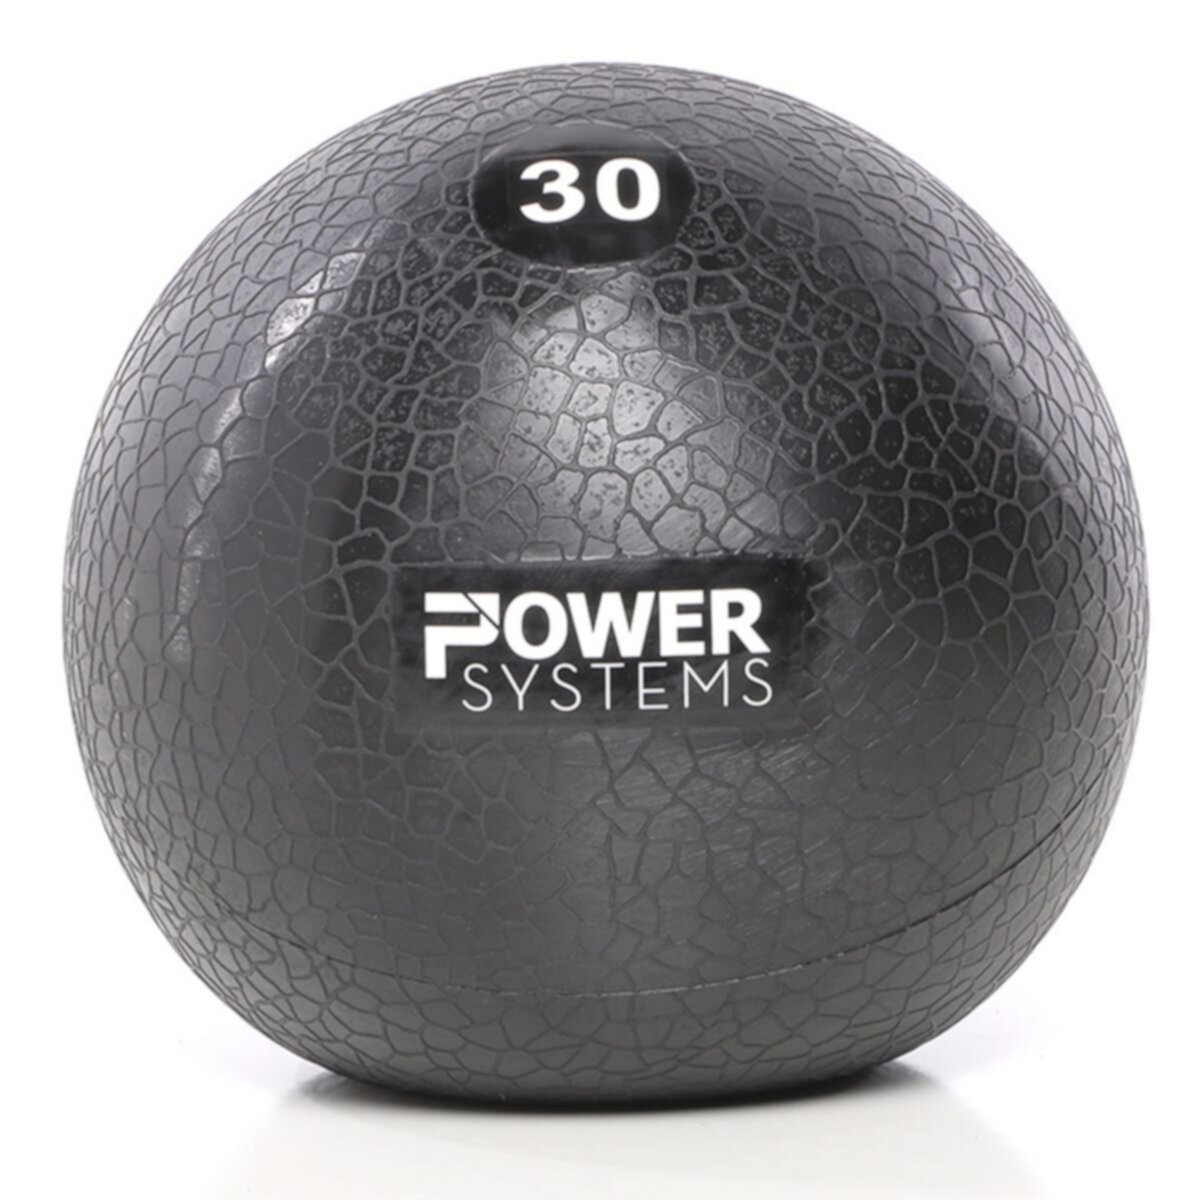 Power Systems Premium Slam Exercise Ball Prime Training Weight, 4 Pounds, Gray Power Systems